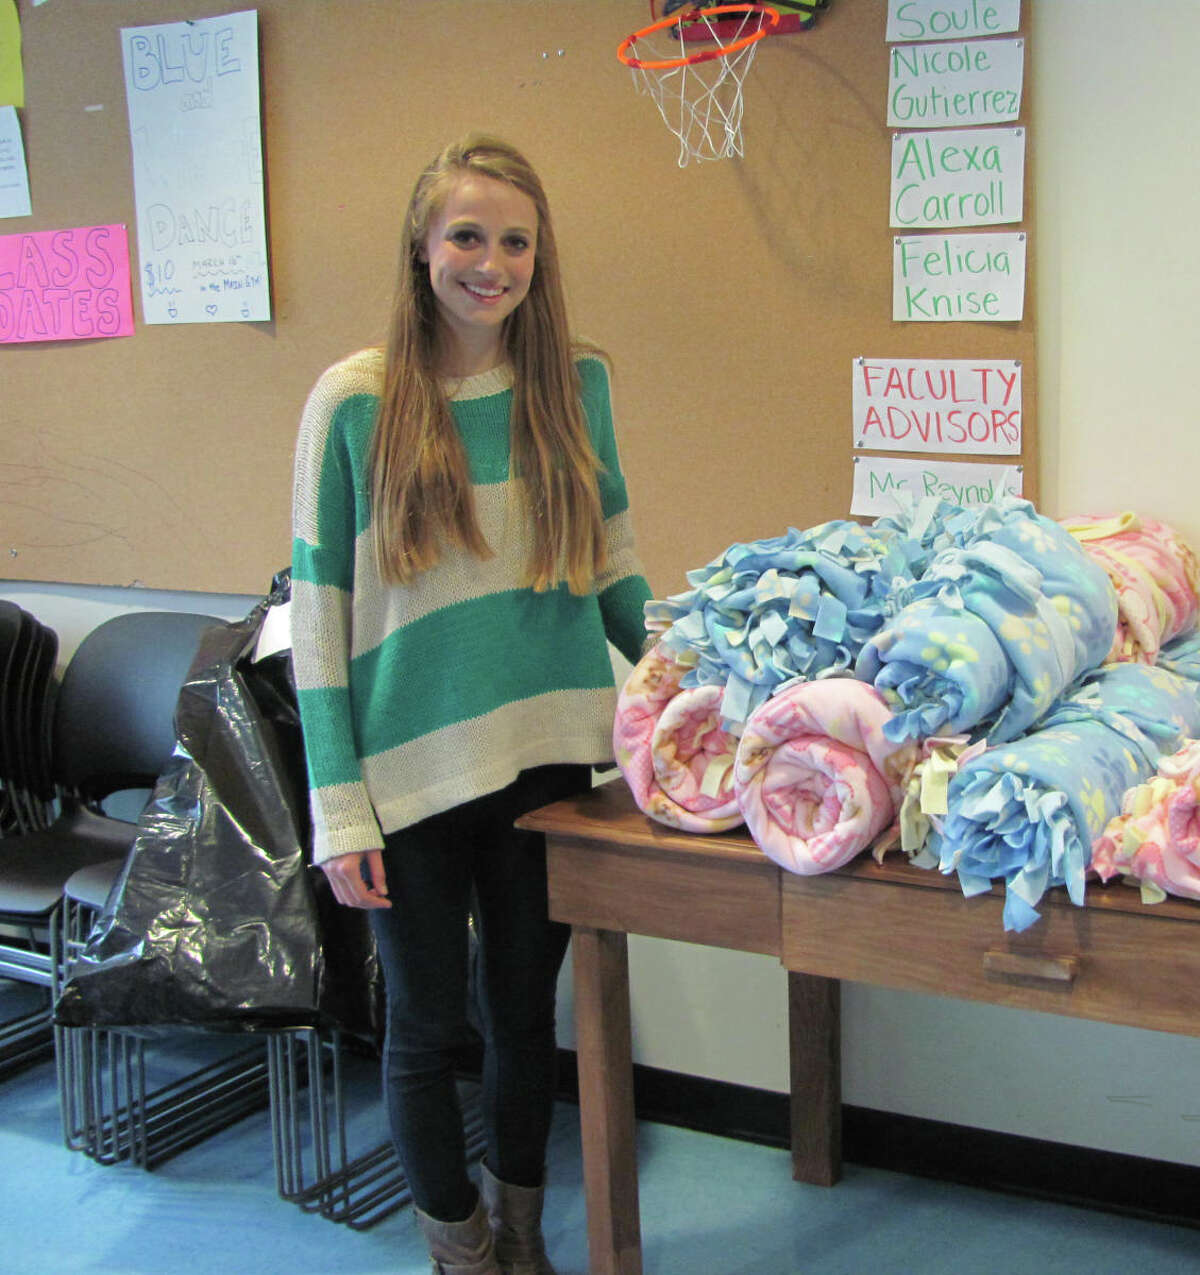 Darien High School senior and Community Council leader McKinley Stauffer arranged the Blankets for Preemies day at DHS on March 16, 2012, where students completed more than 60 blankets throughout the day. Darien, Conn.